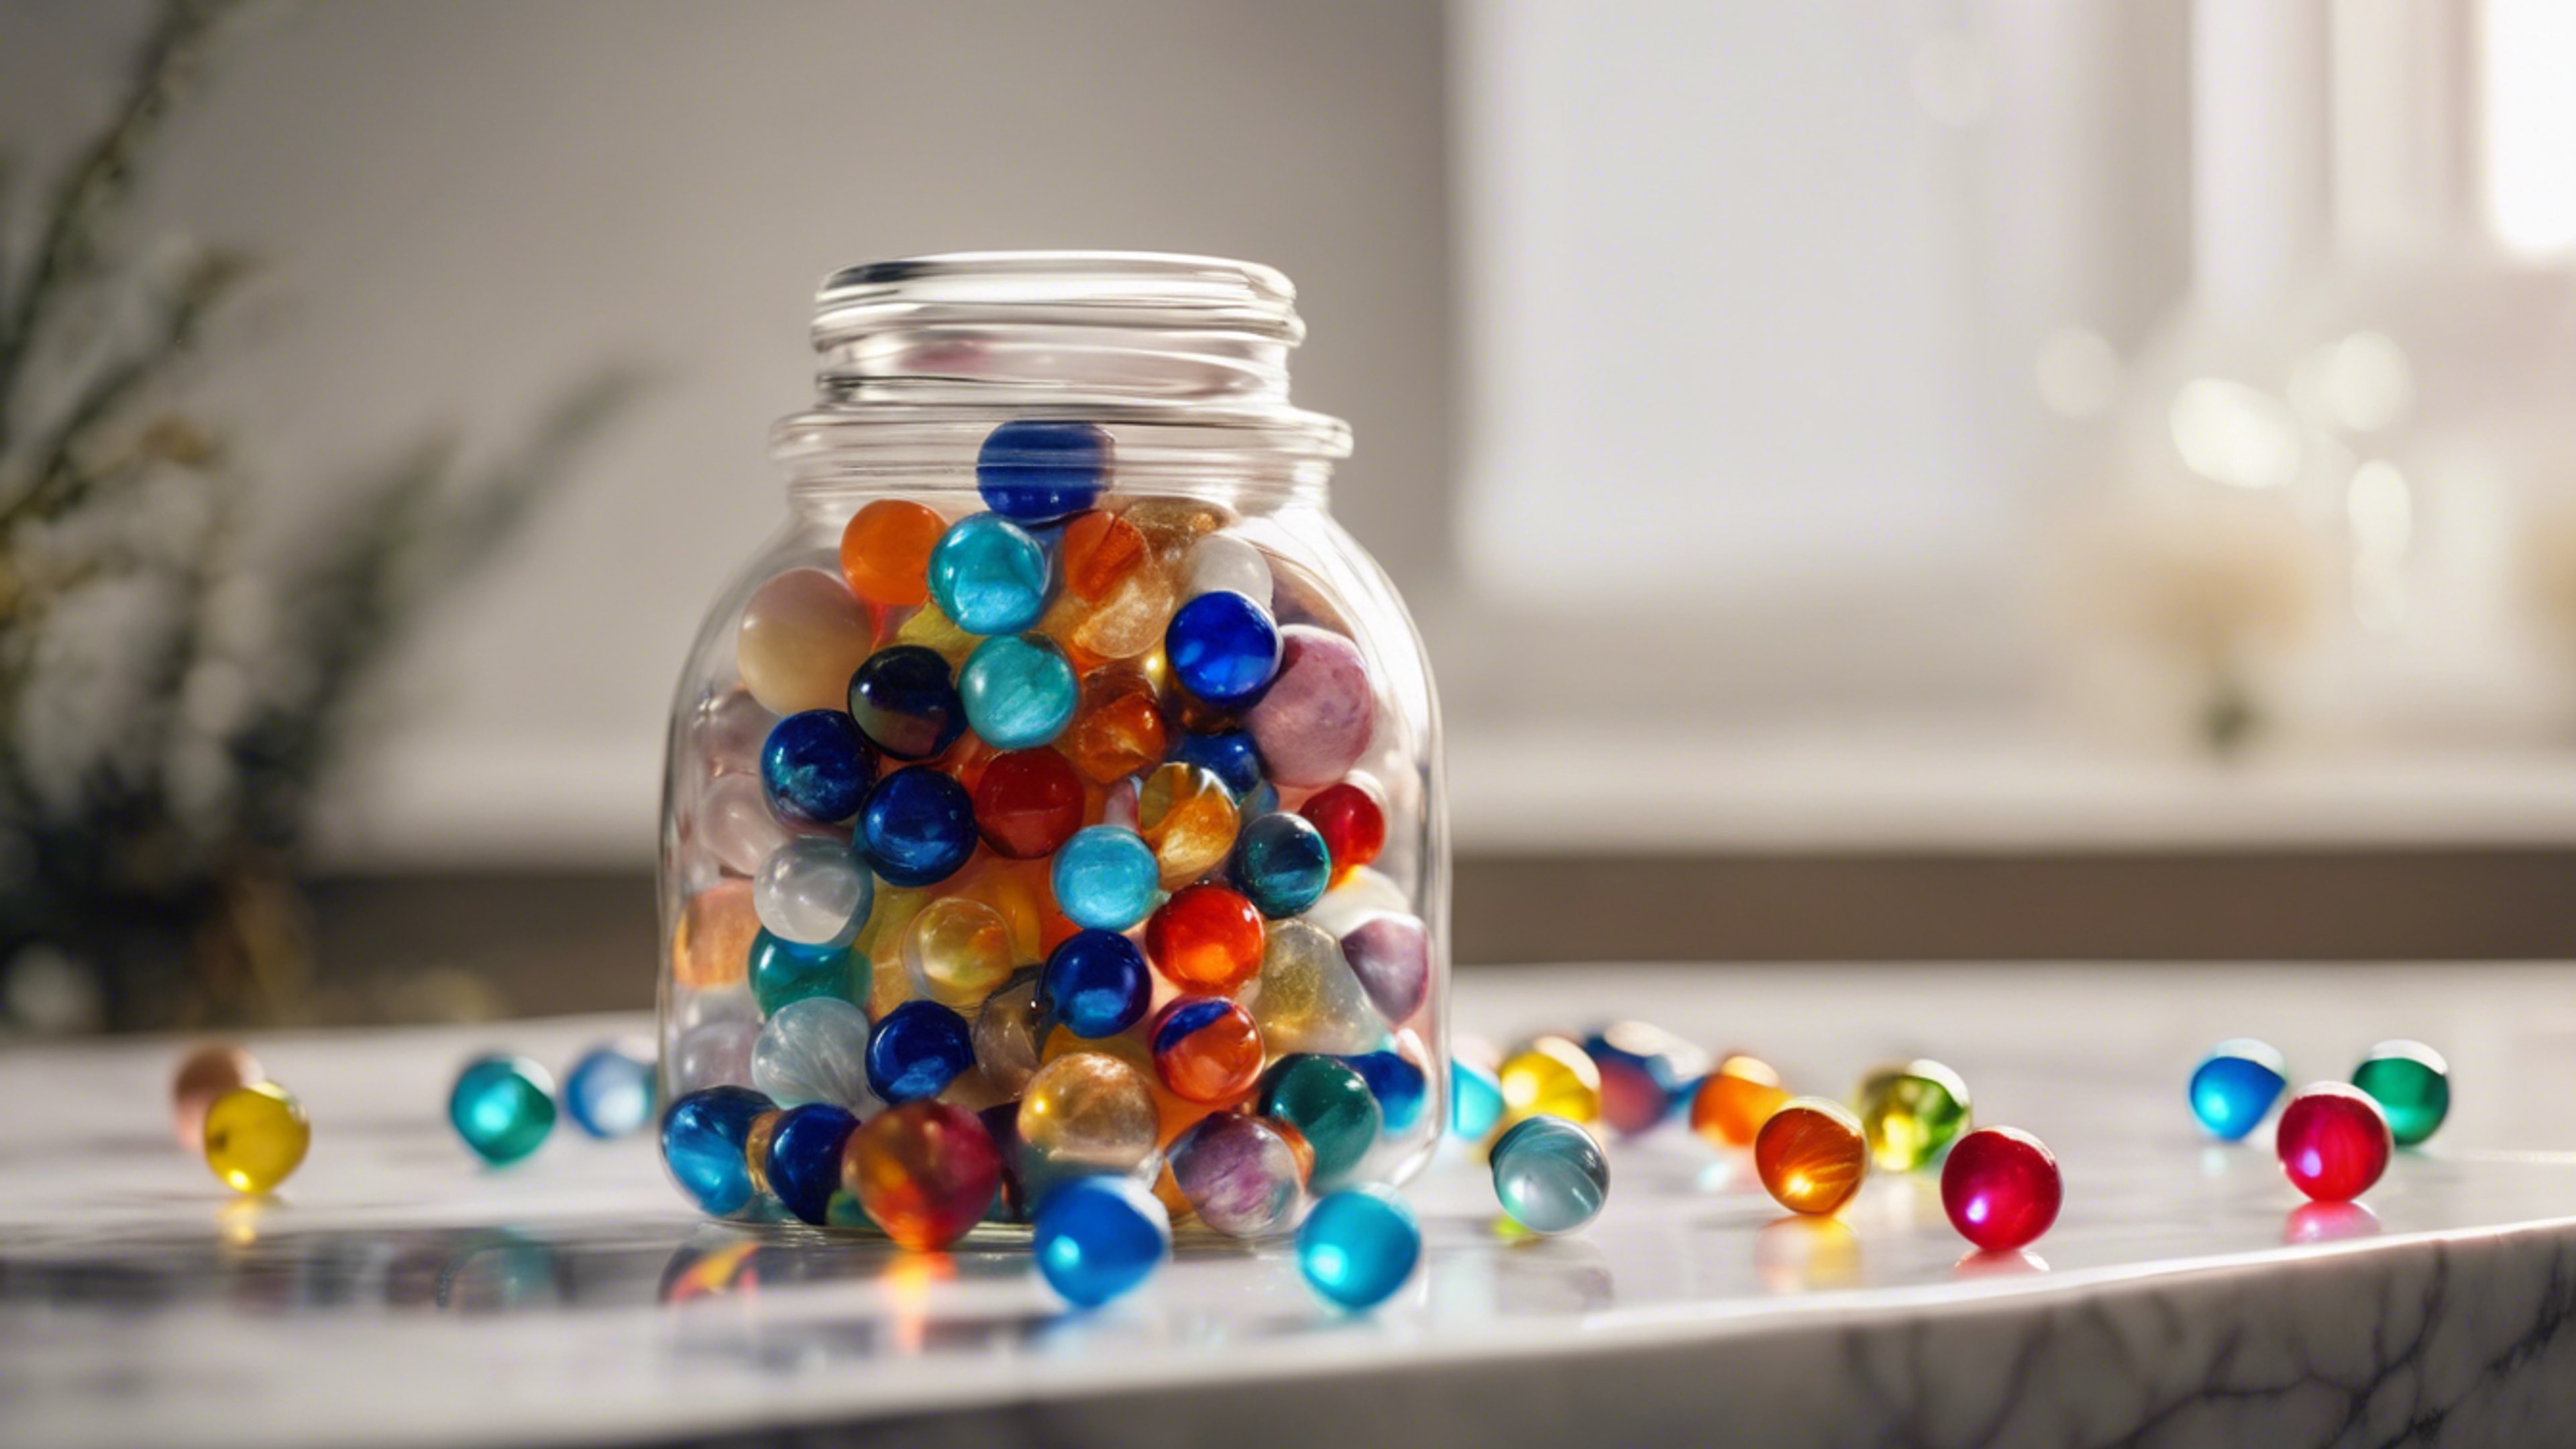 A glass jar full of colorful marbles with glinting lights around them, placed on a white marble surface. Tapet[9438bf9259b84d3ca042]